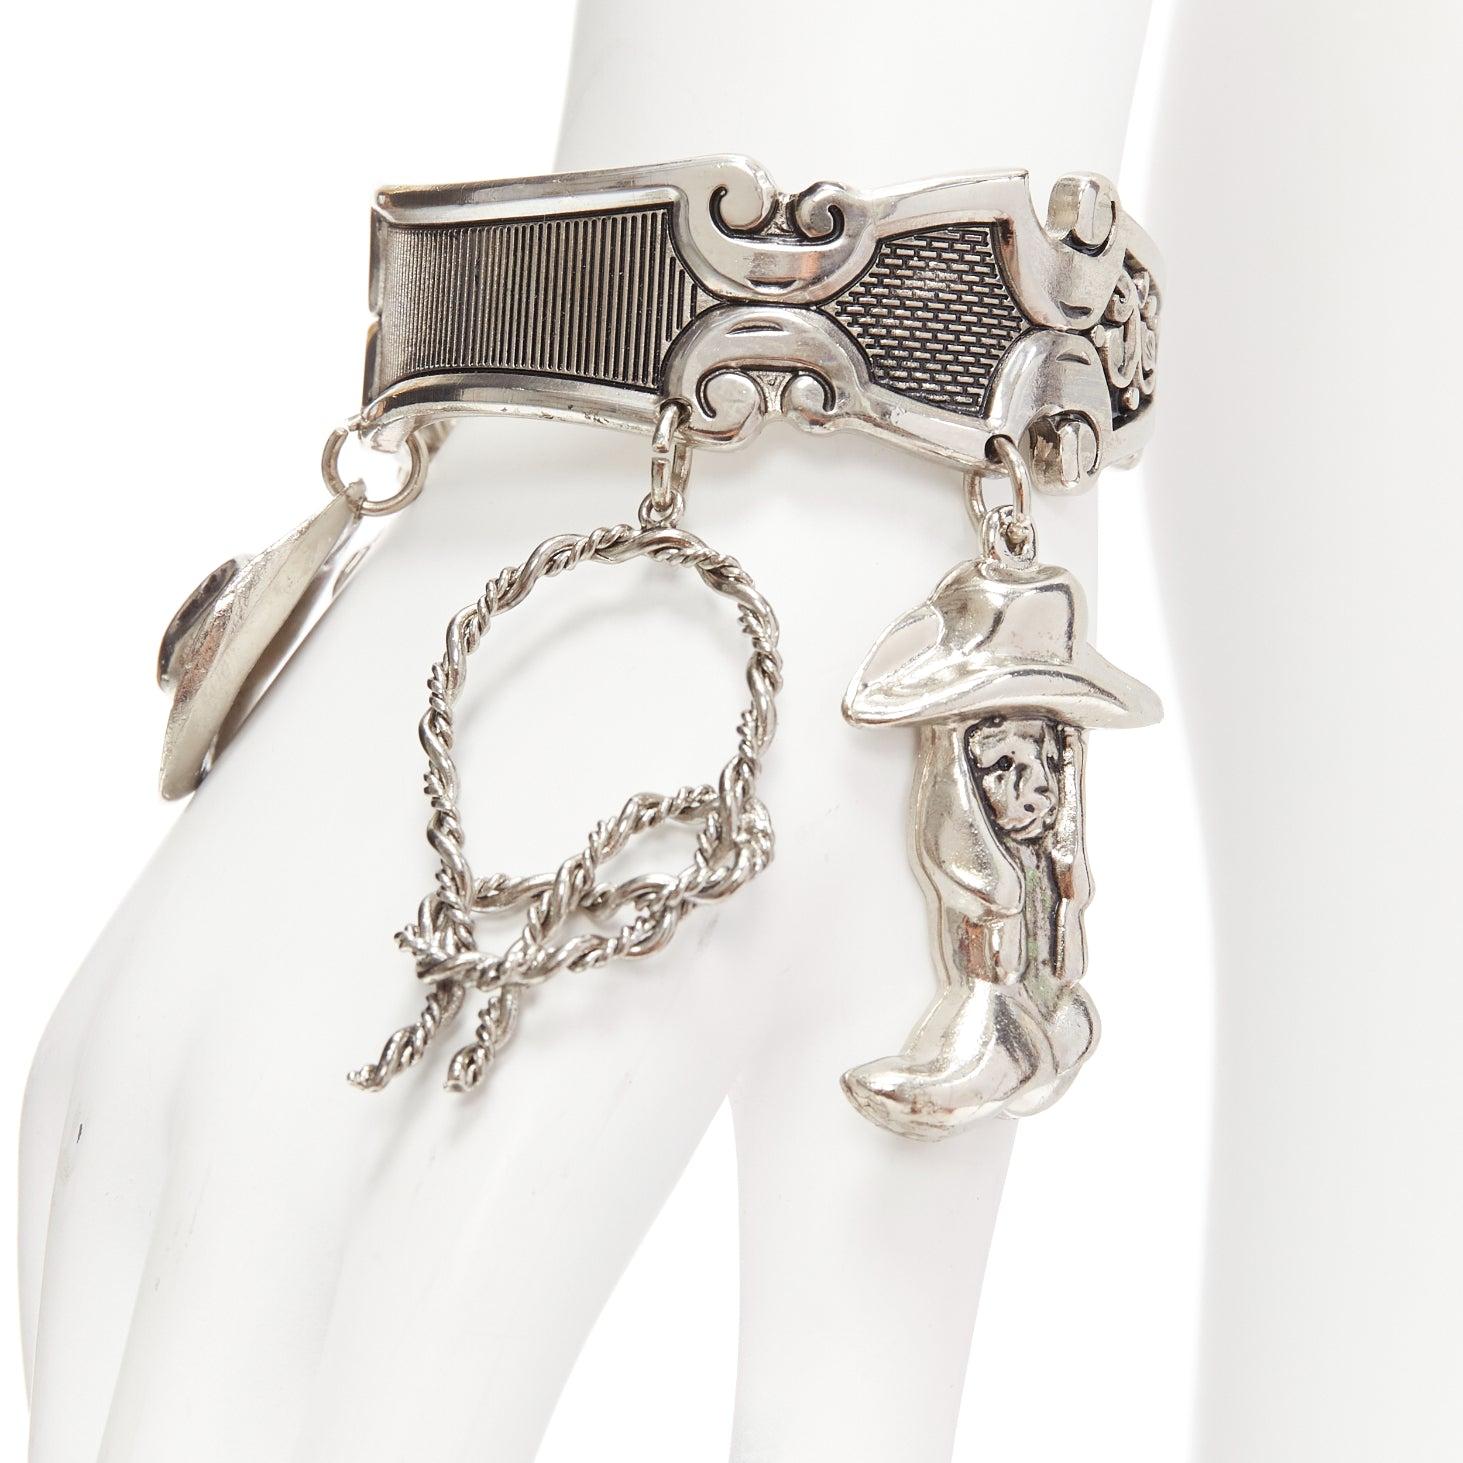 DSQUARED2 Vintage silver metal Western Cowboy charm cuff bangle
Reference: ANWU/A01079
Brand: Dsquared2
Material: Metal
Color: Silver
Pattern: Solid
Lining: Silver Metal
Extra Details: Cowboy boot, loop, hat and seam baroque motive details.
Made in: